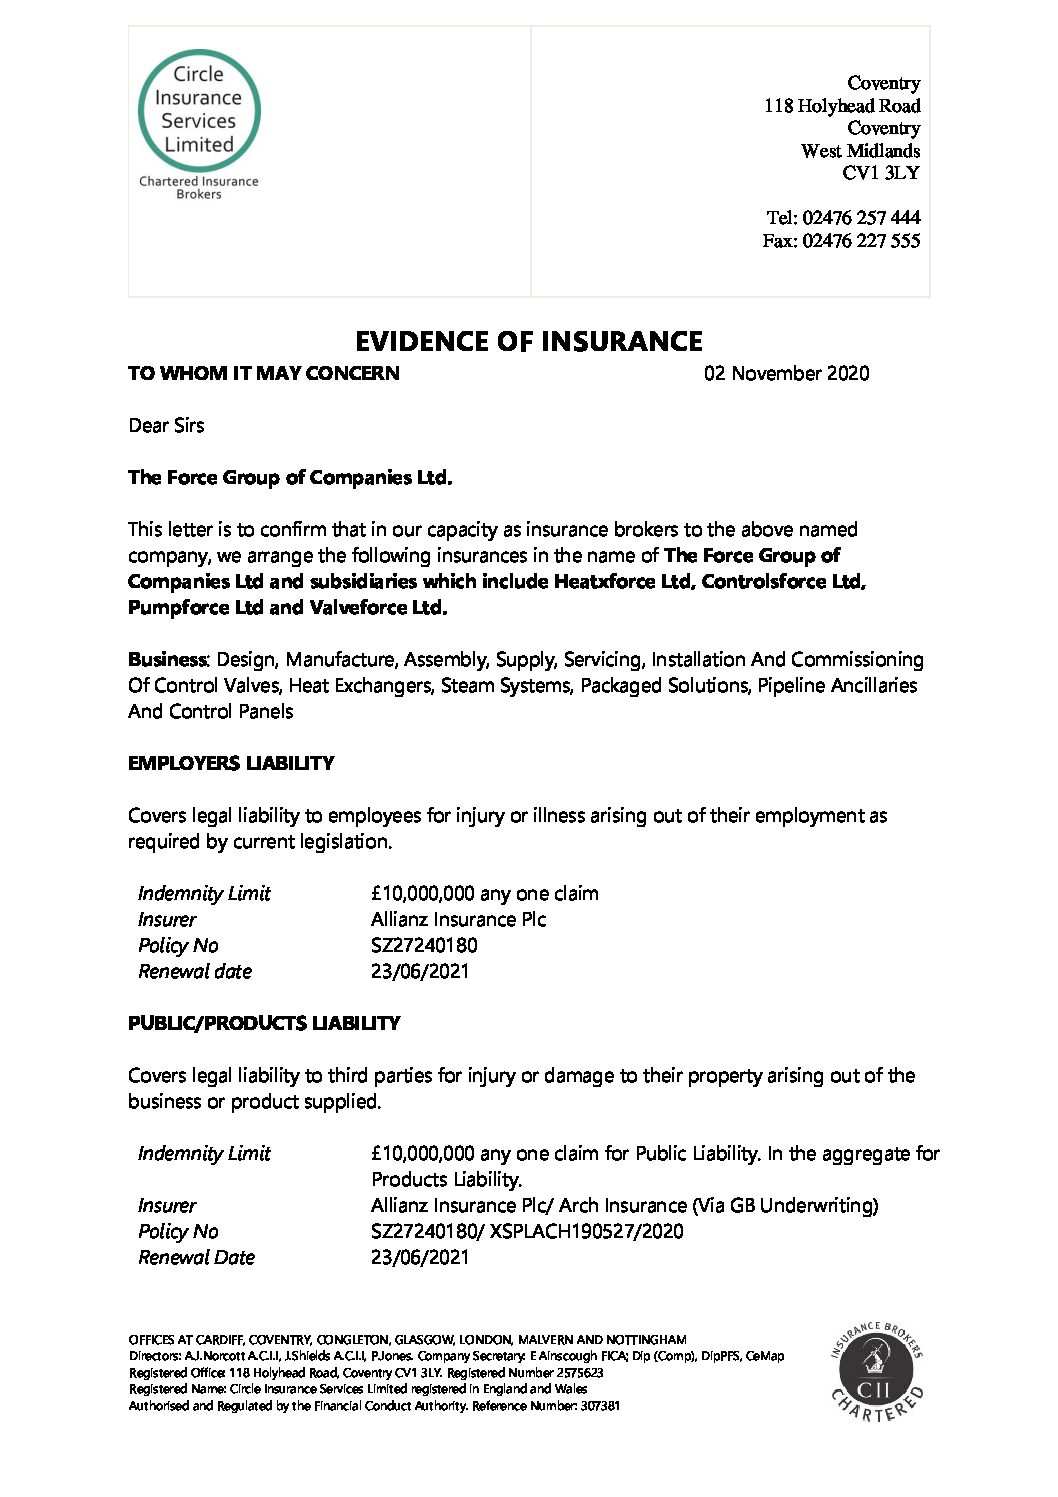 The-Force-Group-Evidence_of_insurance_policy-Group-details-exp-23.06.21-updated-02.11.2020-1-pdf.jpg